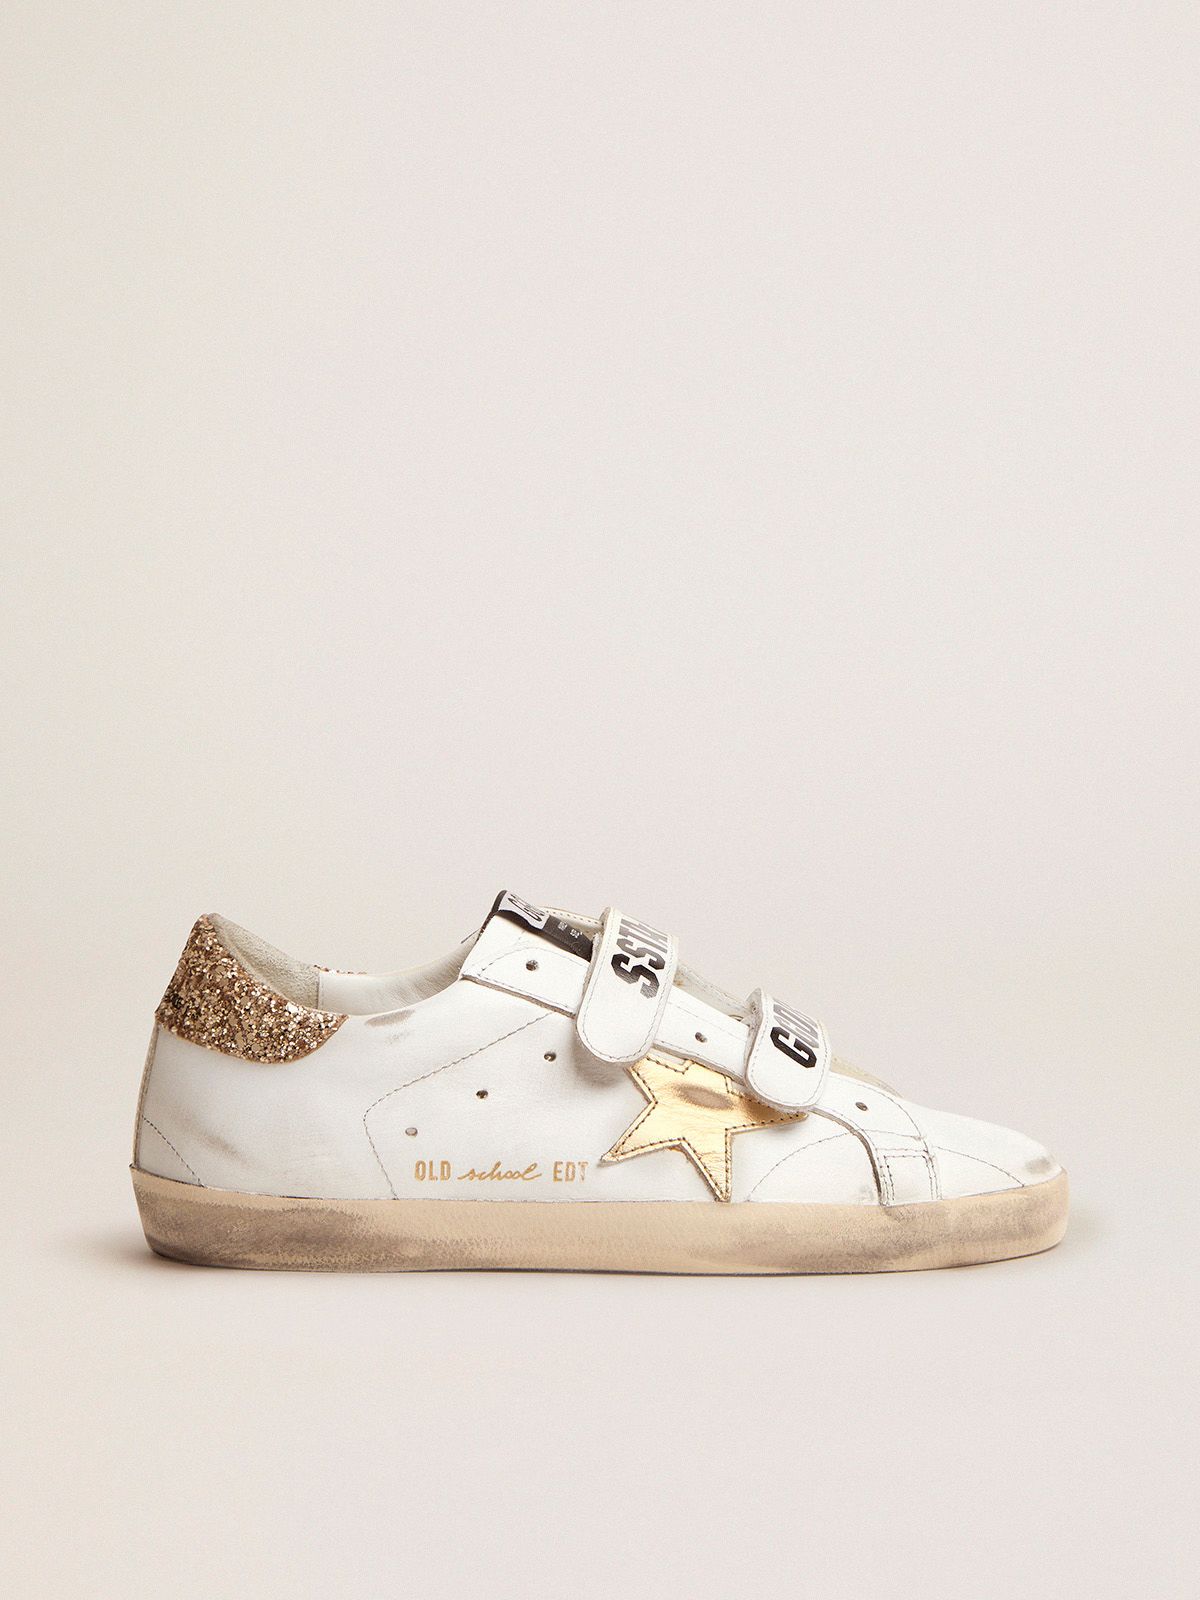 Sneakers Uomo Golden Goose Old School sneakers with gold laminated leather star and gold glitter heel tab